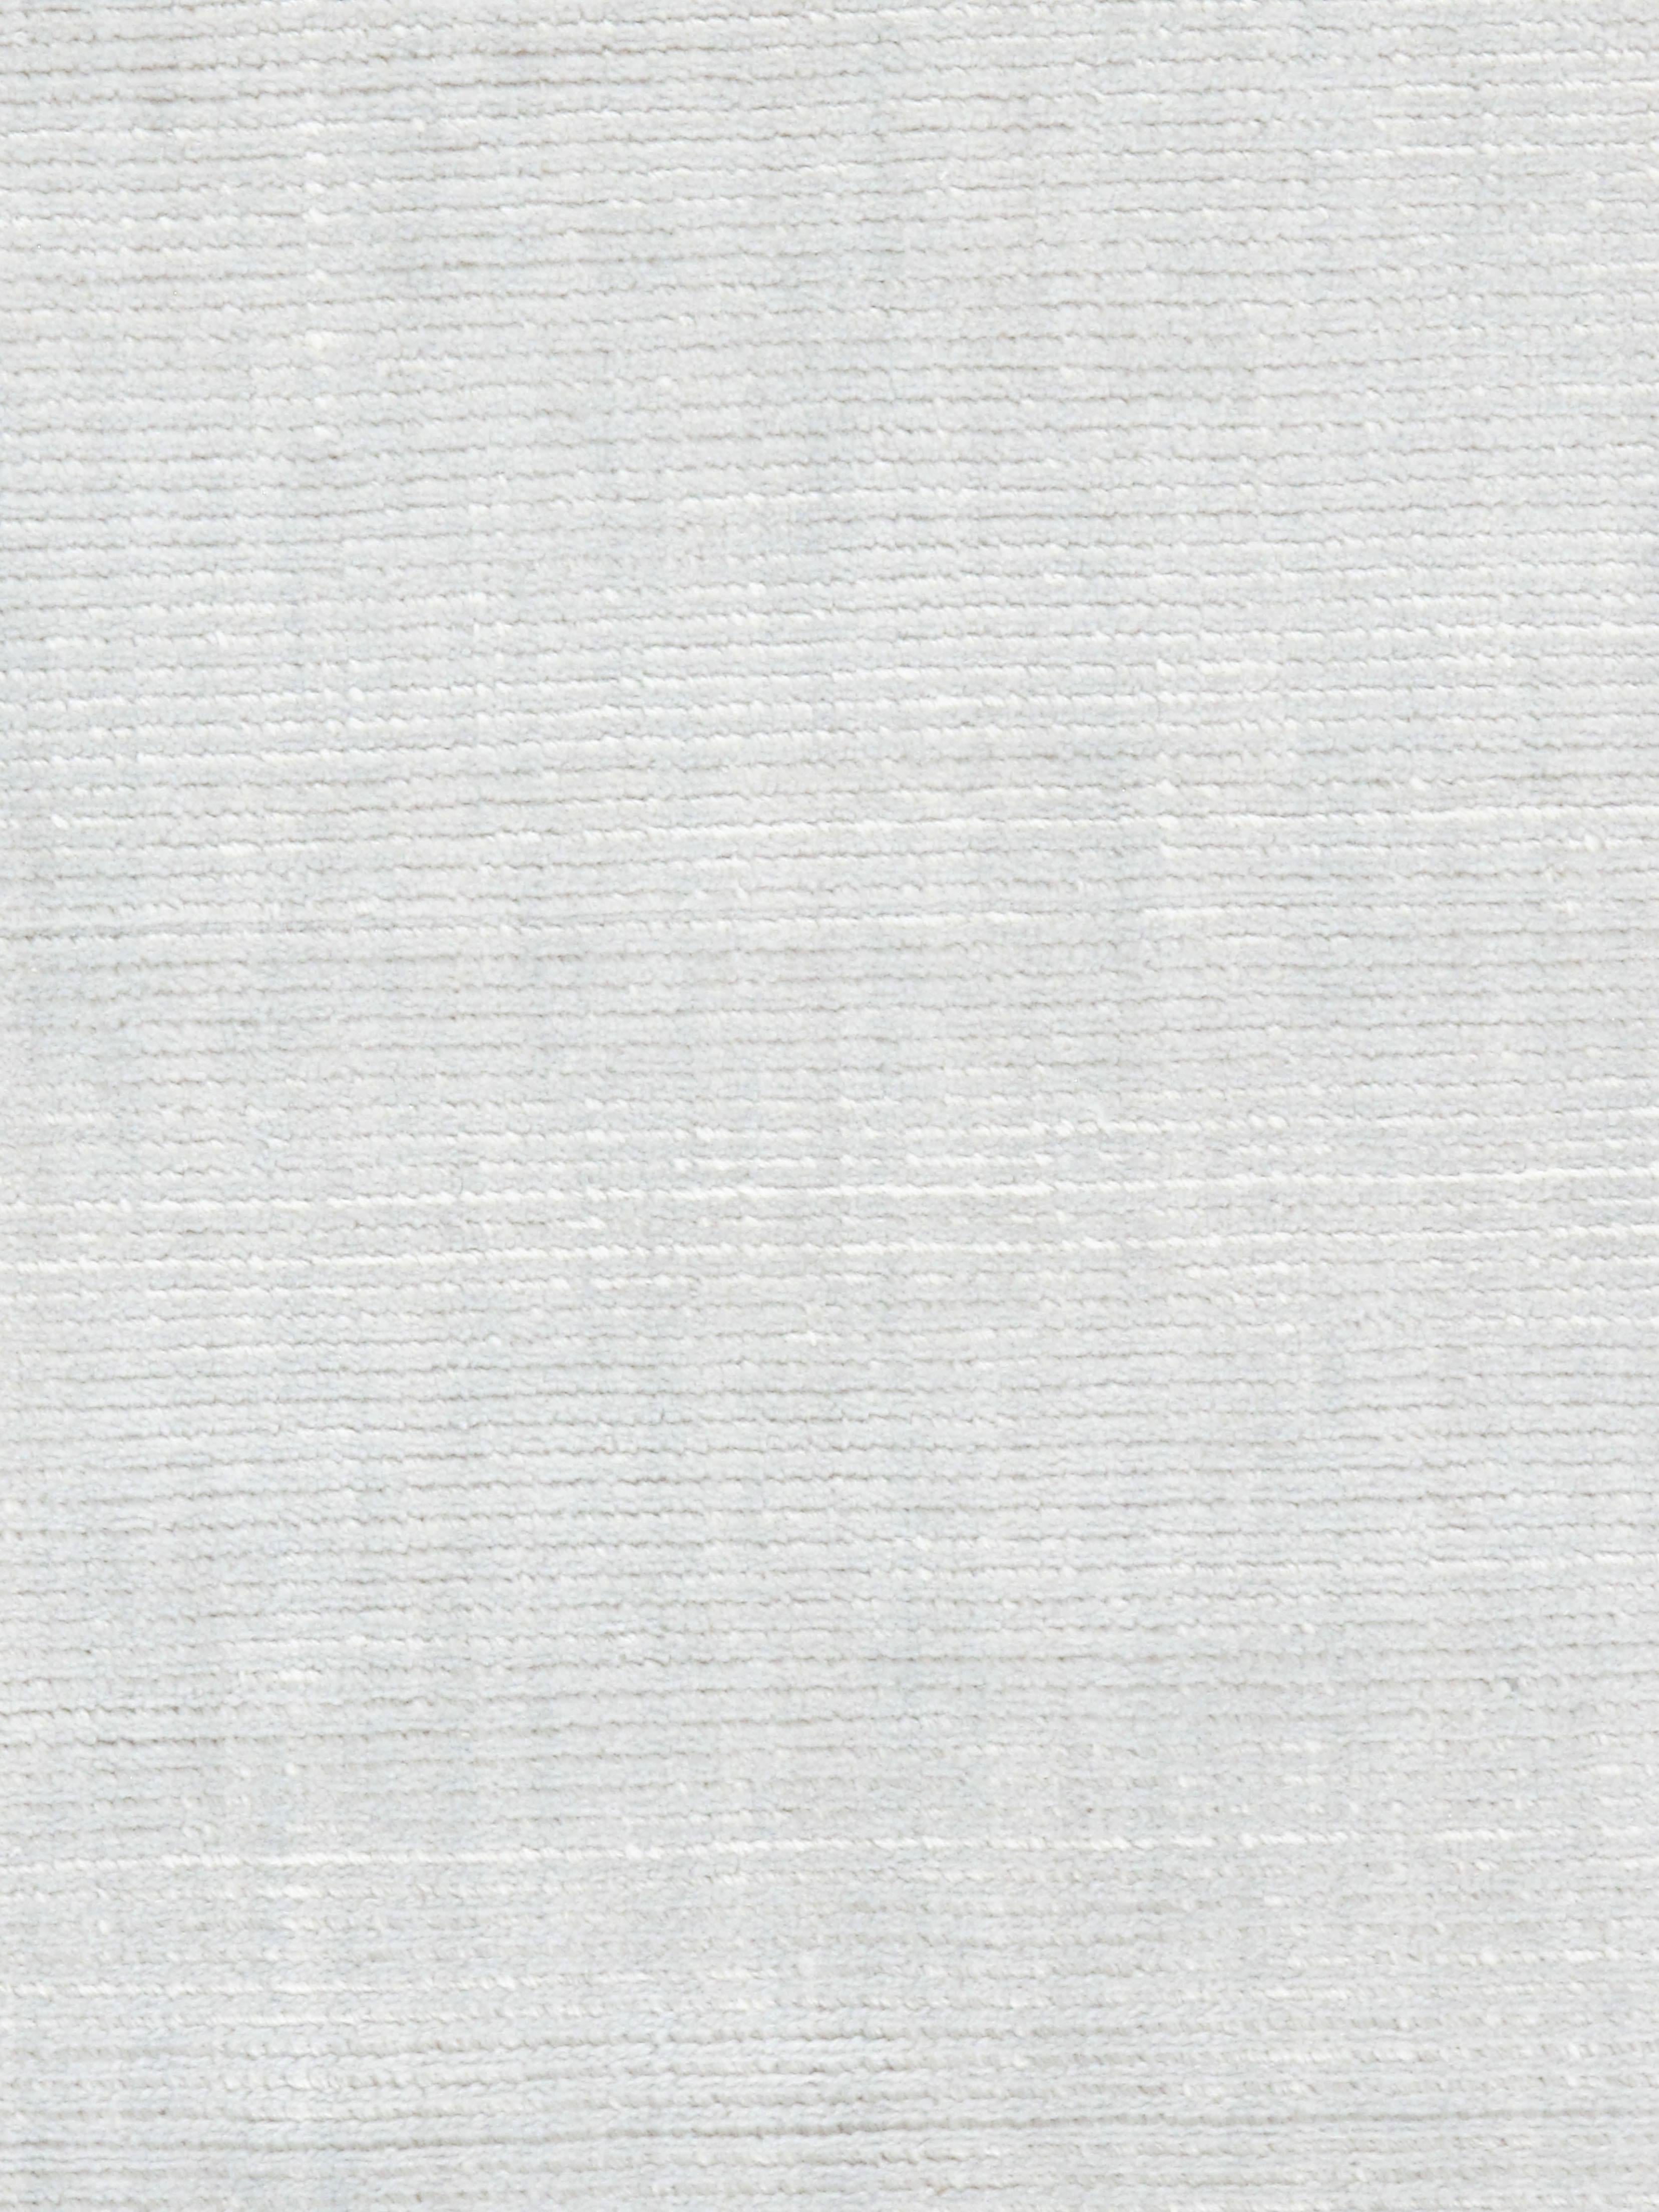 Hand-Crafted Simplicity Polo Pale Blue Rug 8' x 10'